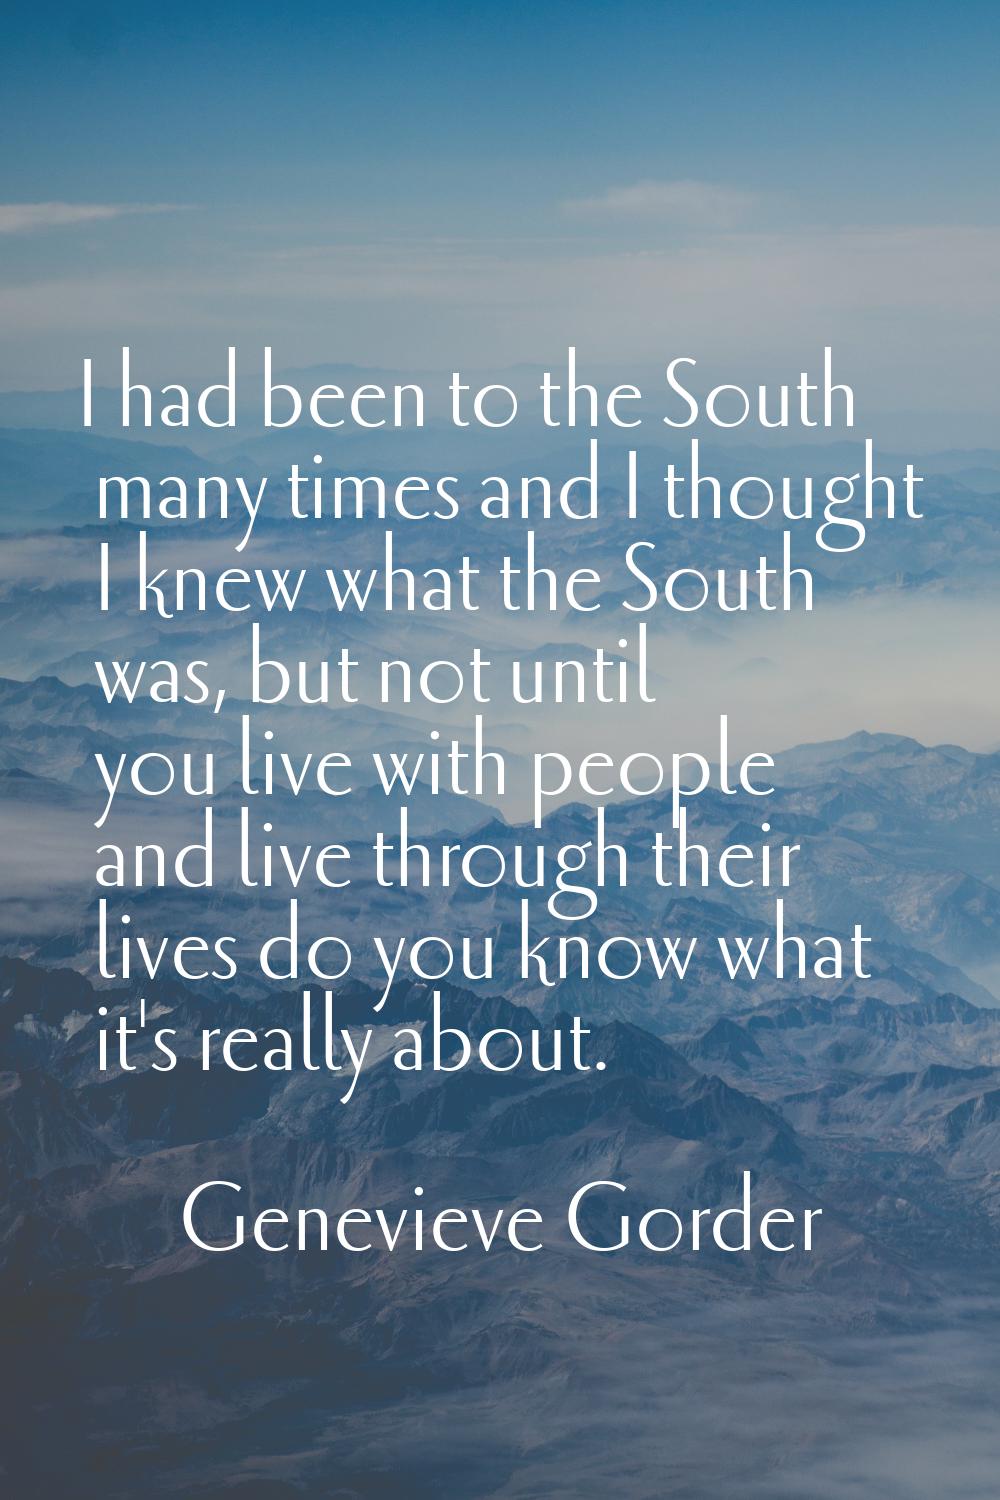 I had been to the South many times and I thought I knew what the South was, but not until you live 